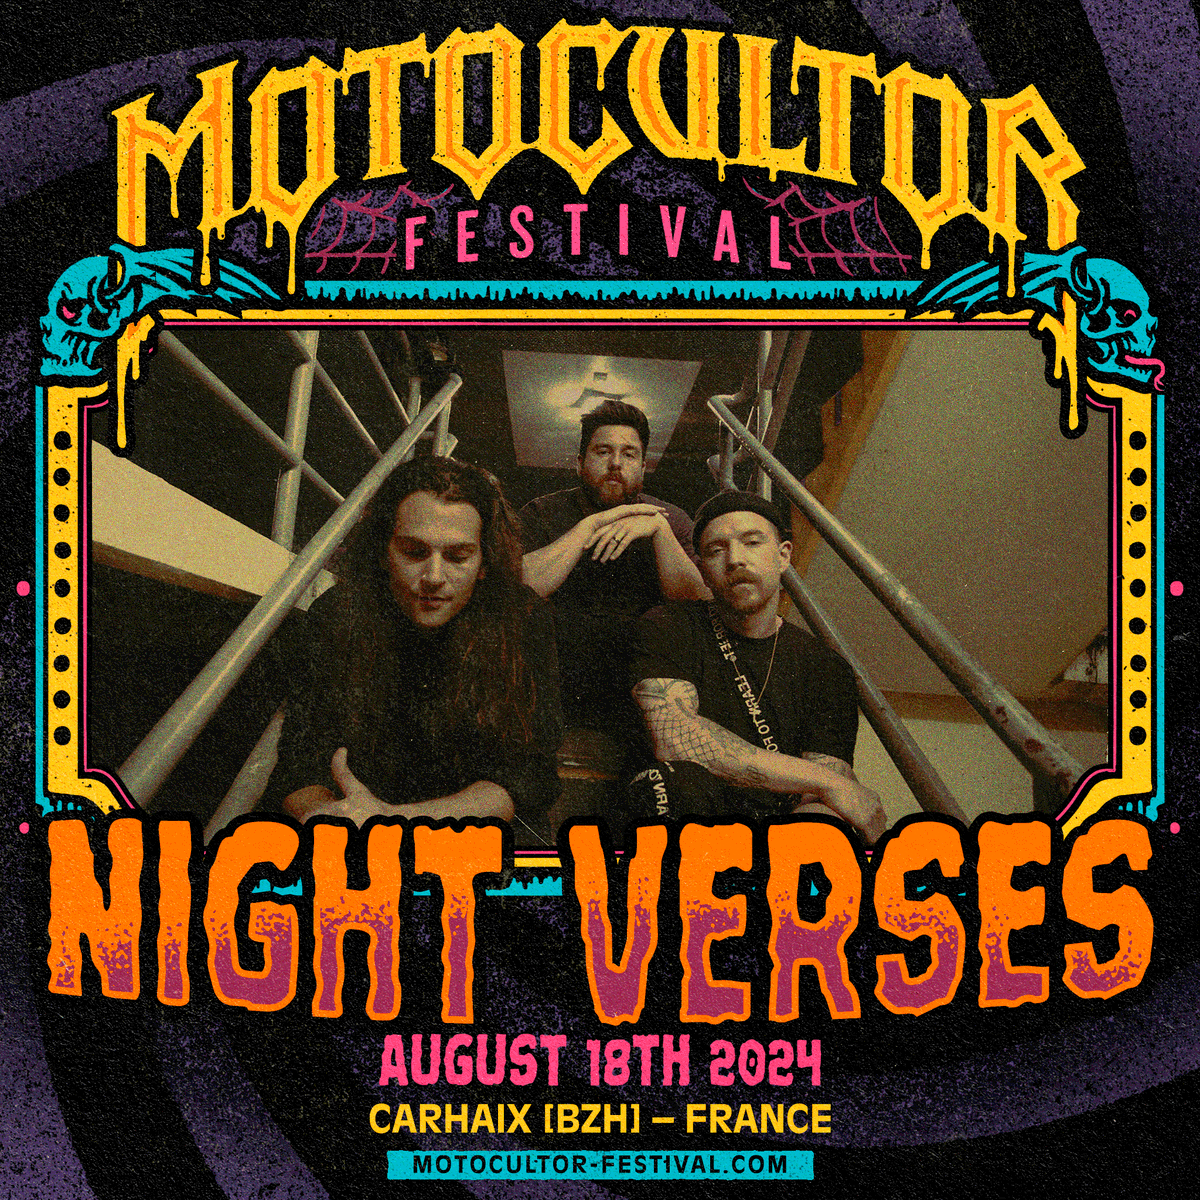 Very excited to be playing @MotocultorFest in France this August. See you there! #NIGHTVERSES #MOTOCULTORFESTIVAL